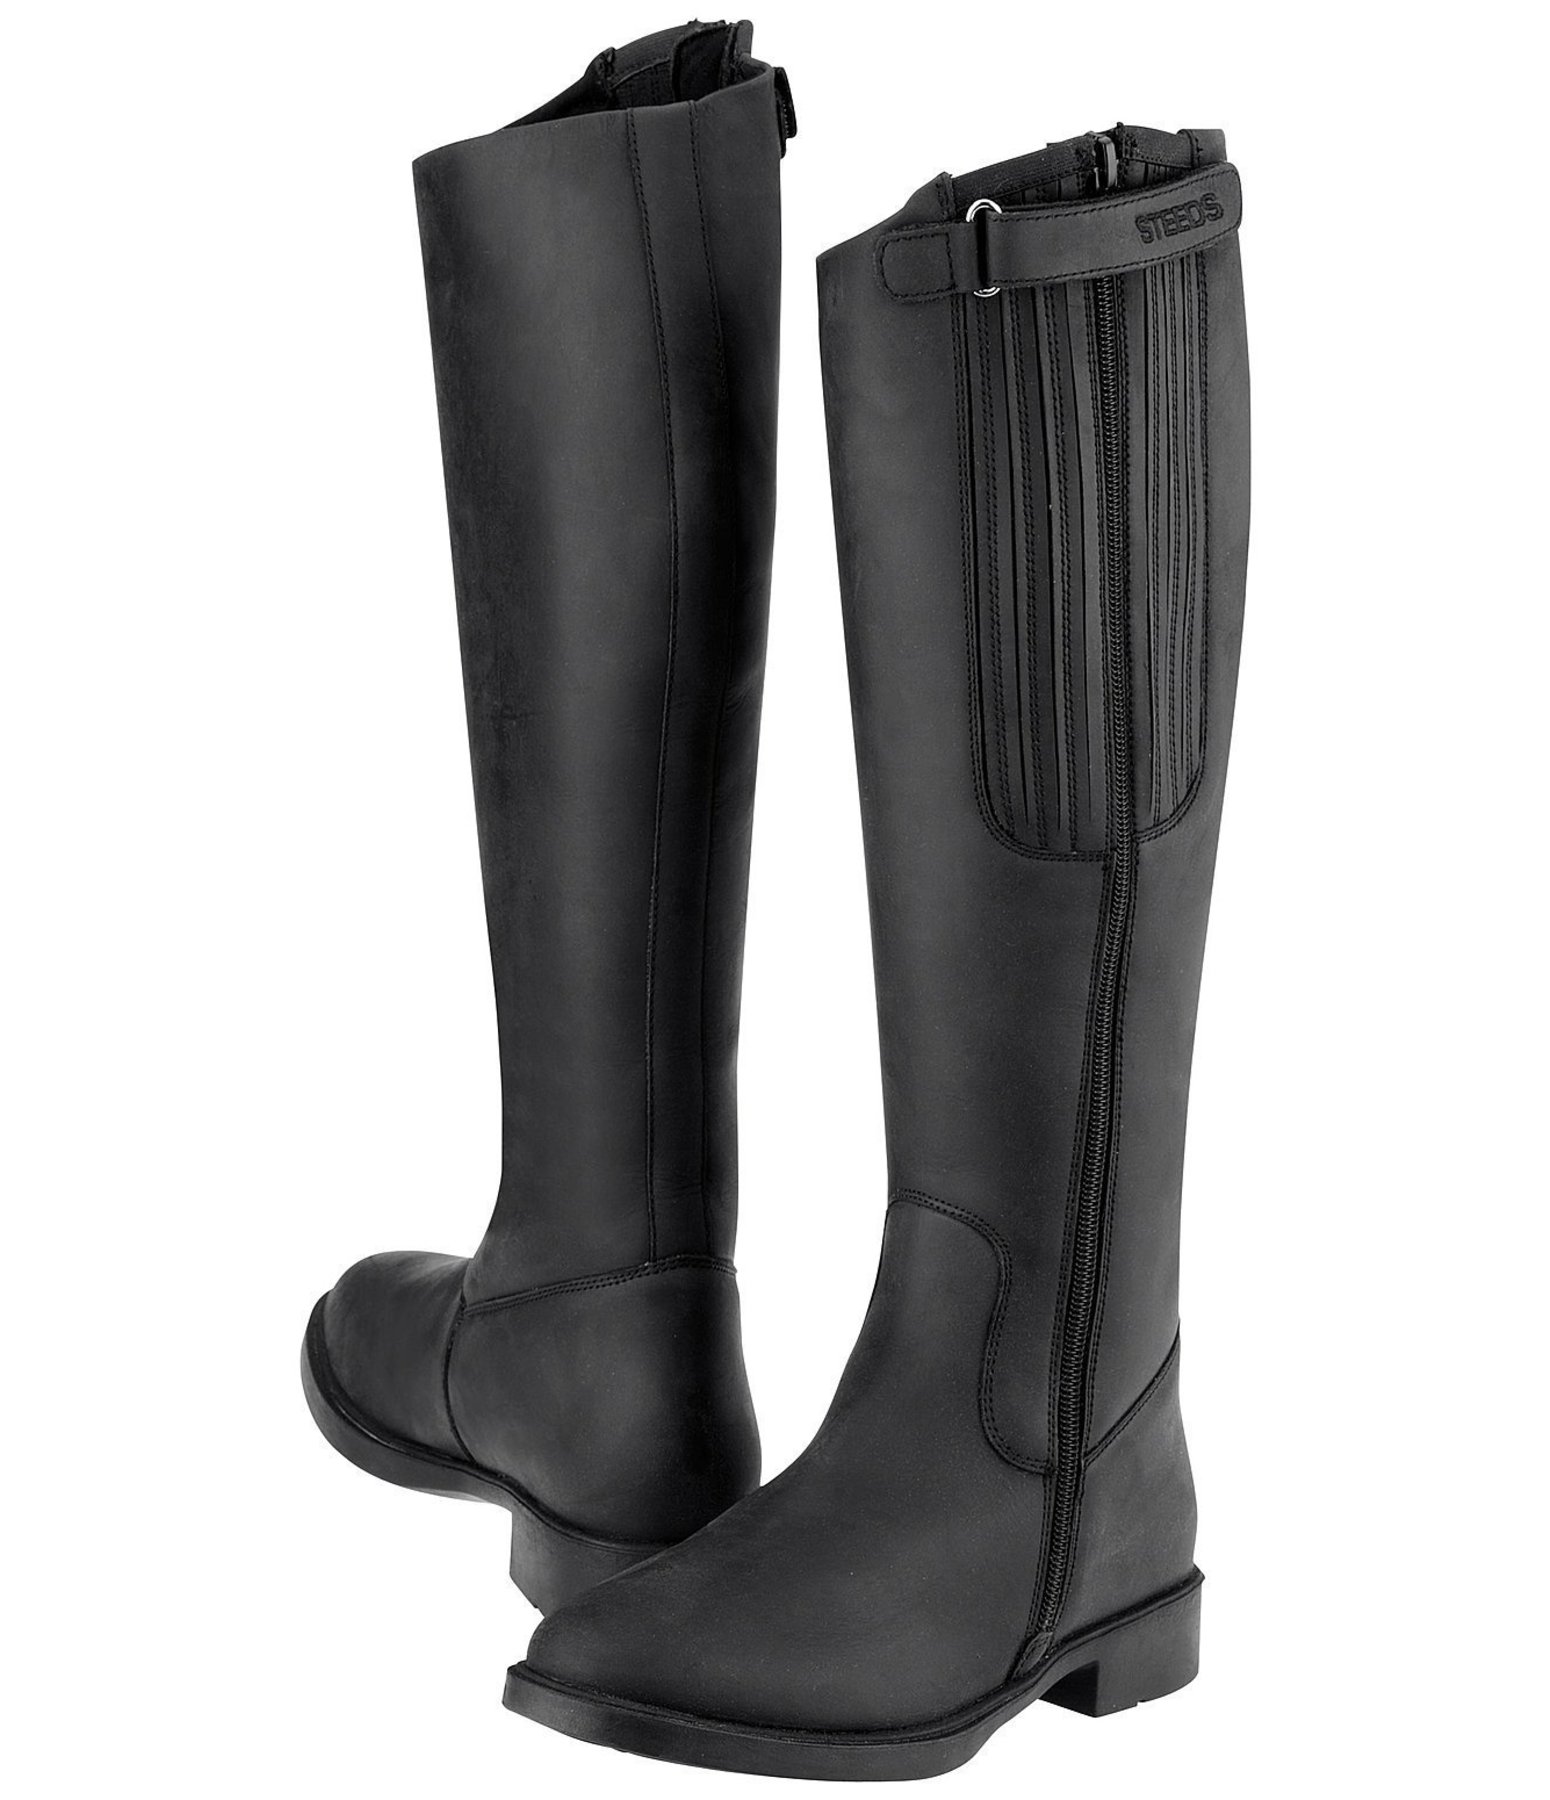 Long Leather Riding Boots Rancher - Long Leather Riding Boots - Kramer ...